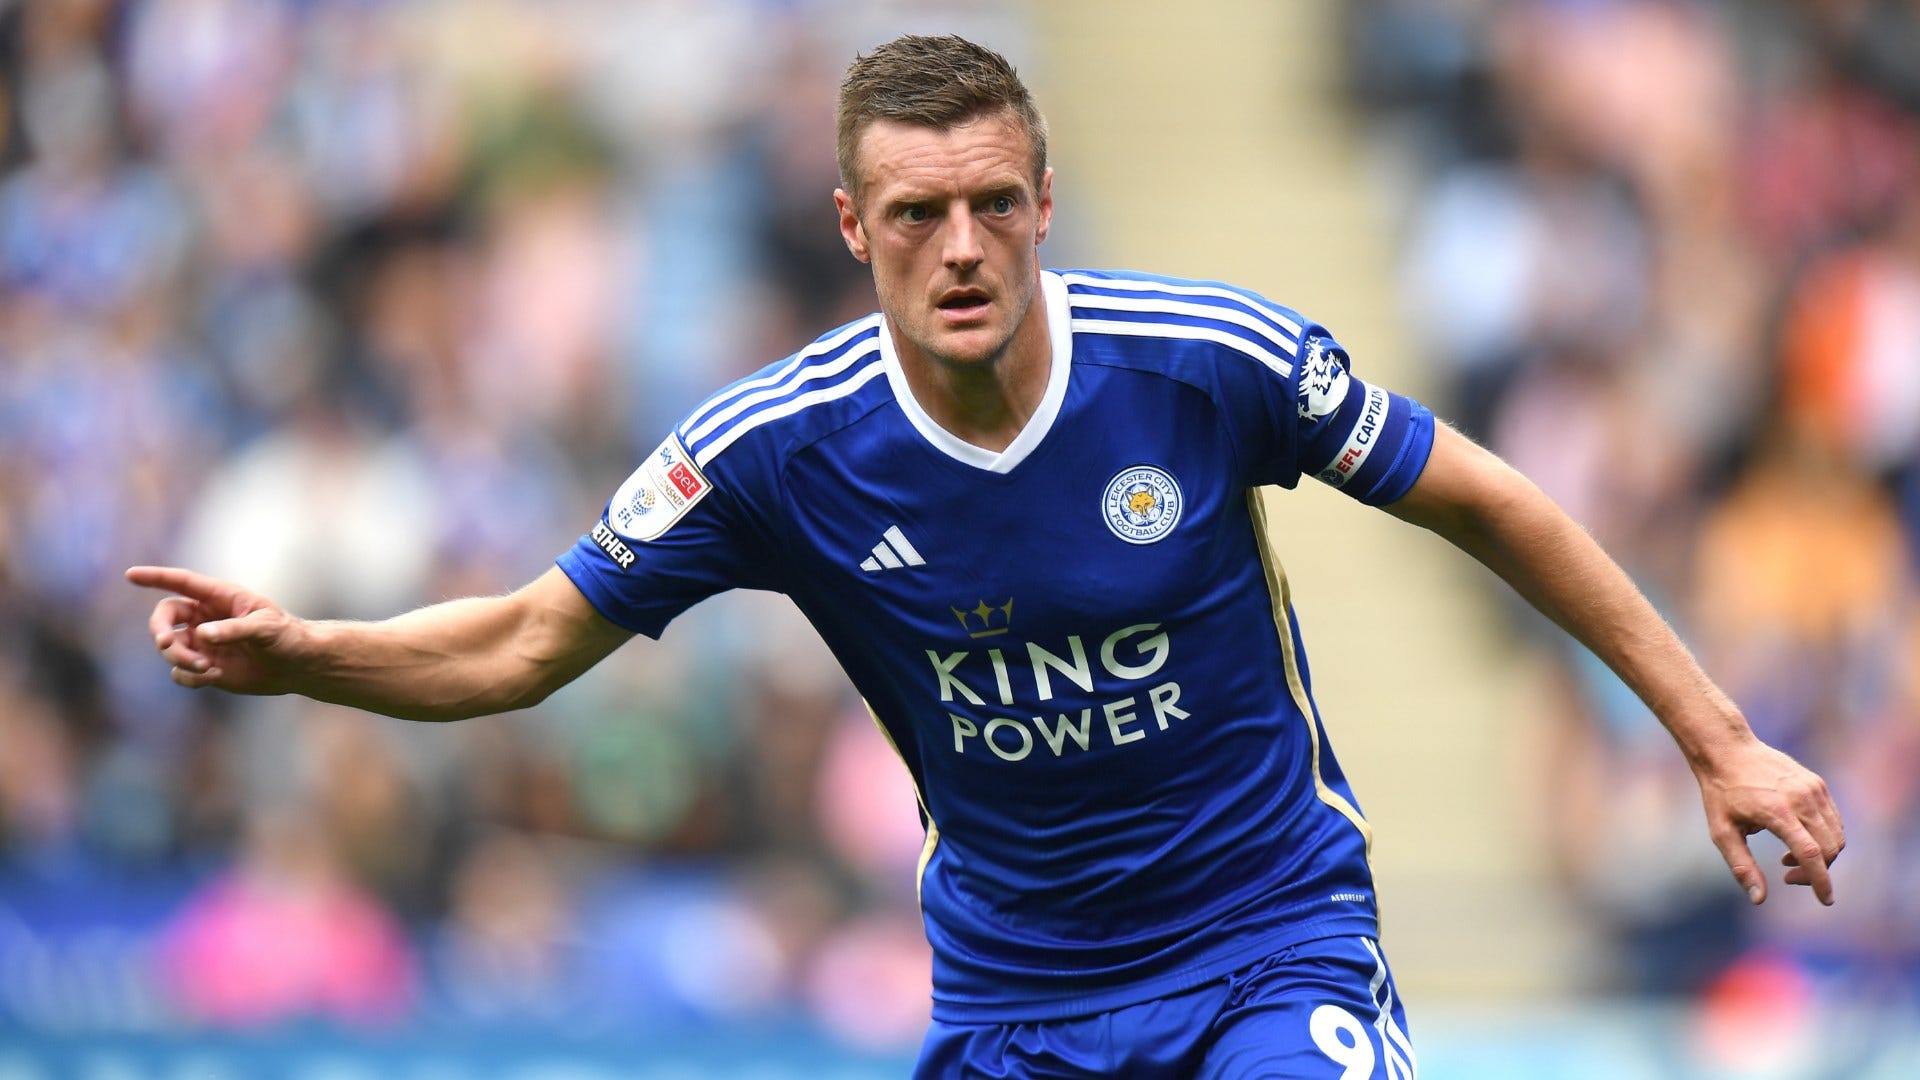 Norwich City vs Leicester City Live stream, TV channel, kick-off time and where to watch Goal US